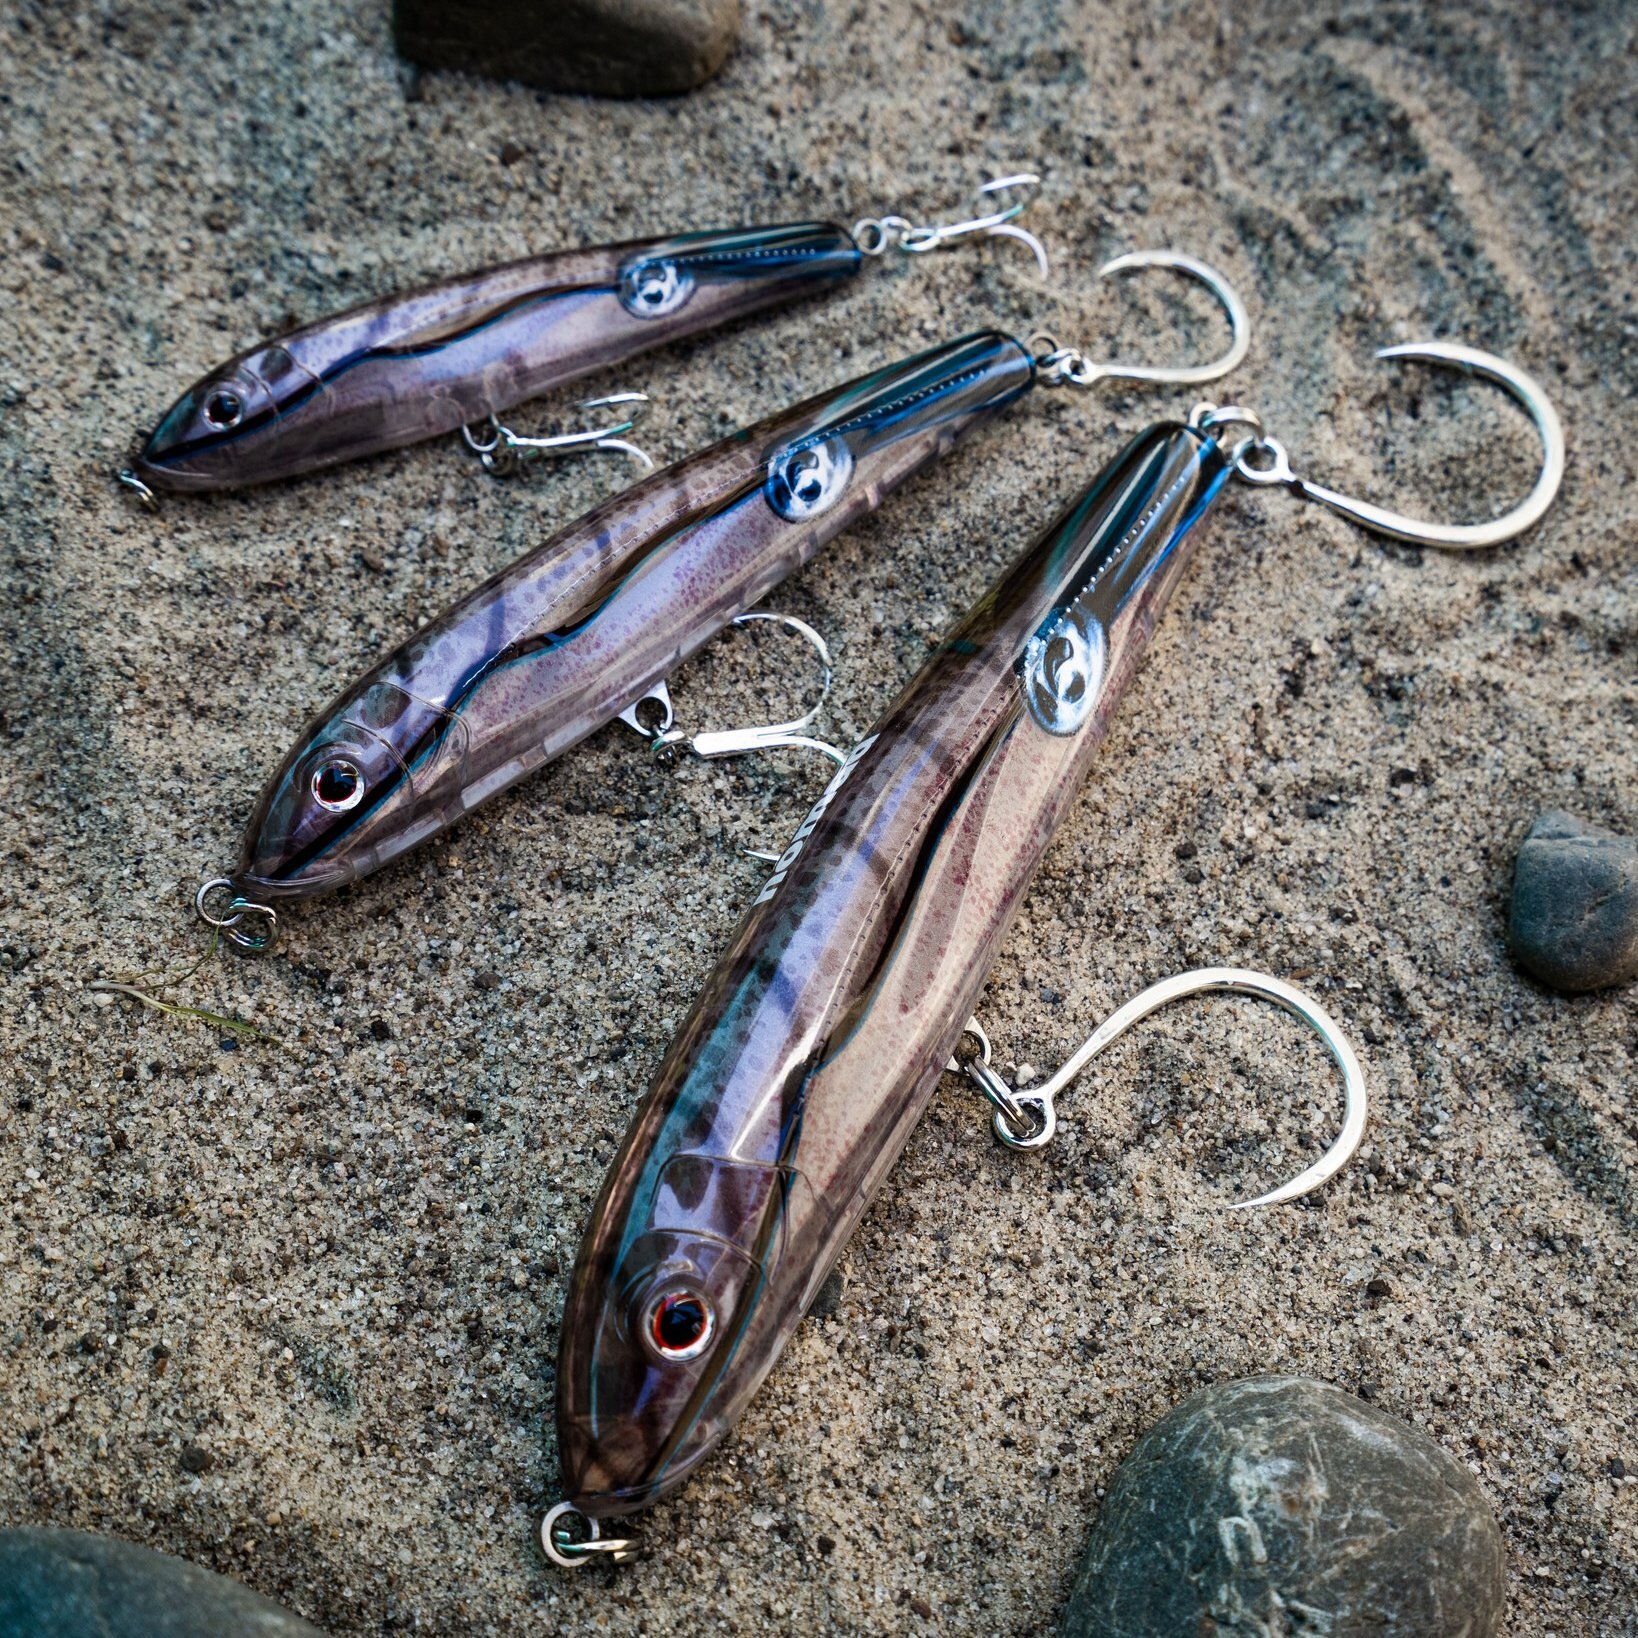 A squad of Squid Riptides.

With 125mm, 155mm, and 200mm in both sinking and floating options, there's a lure to suit every application.

Tip: Keep a couple of natural-coloured lures in your bag, along with some more out-there unnatural colours. A bi